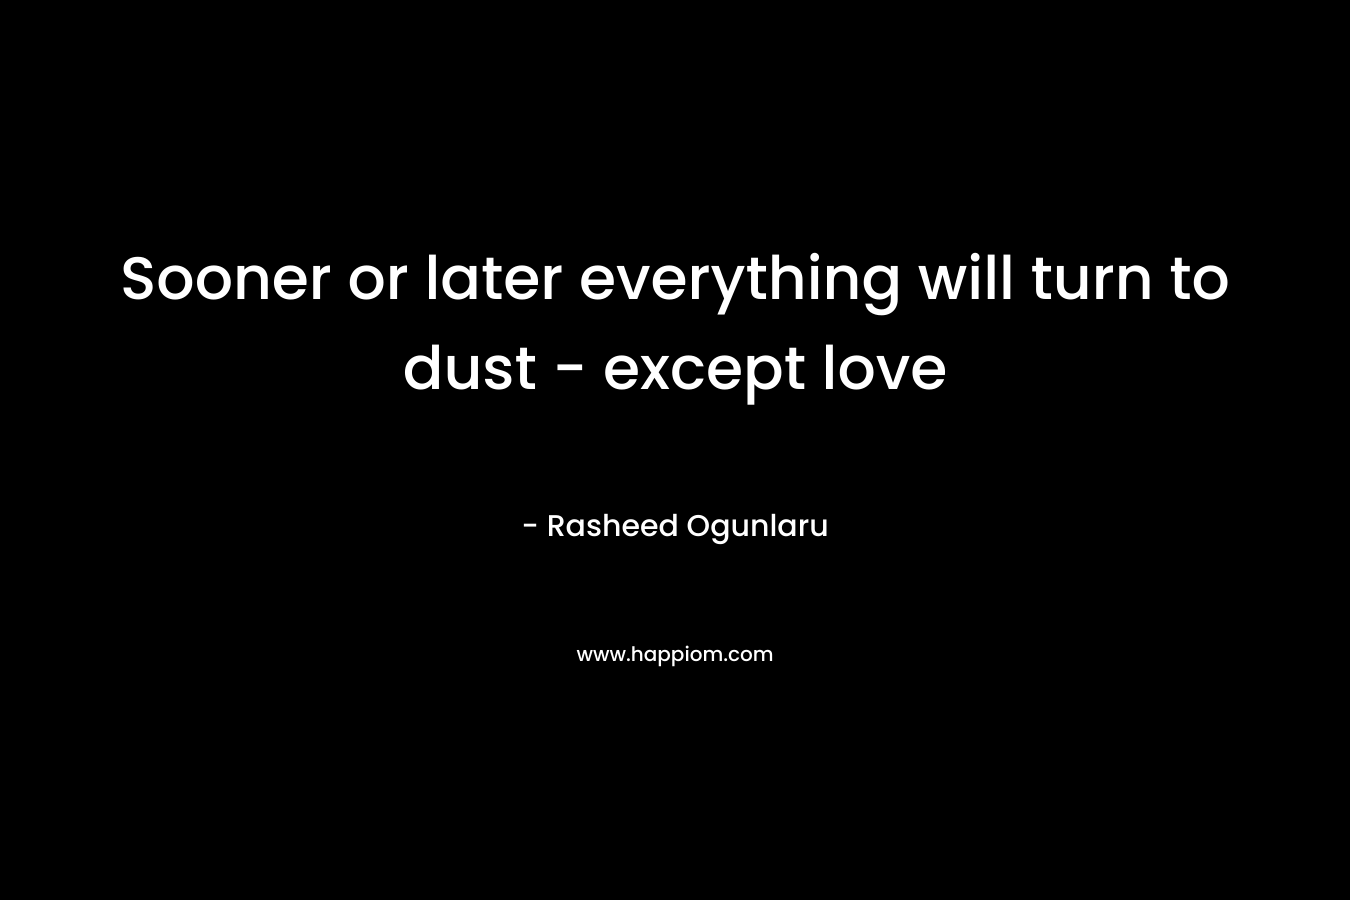 Sooner or later everything will turn to dust - except love